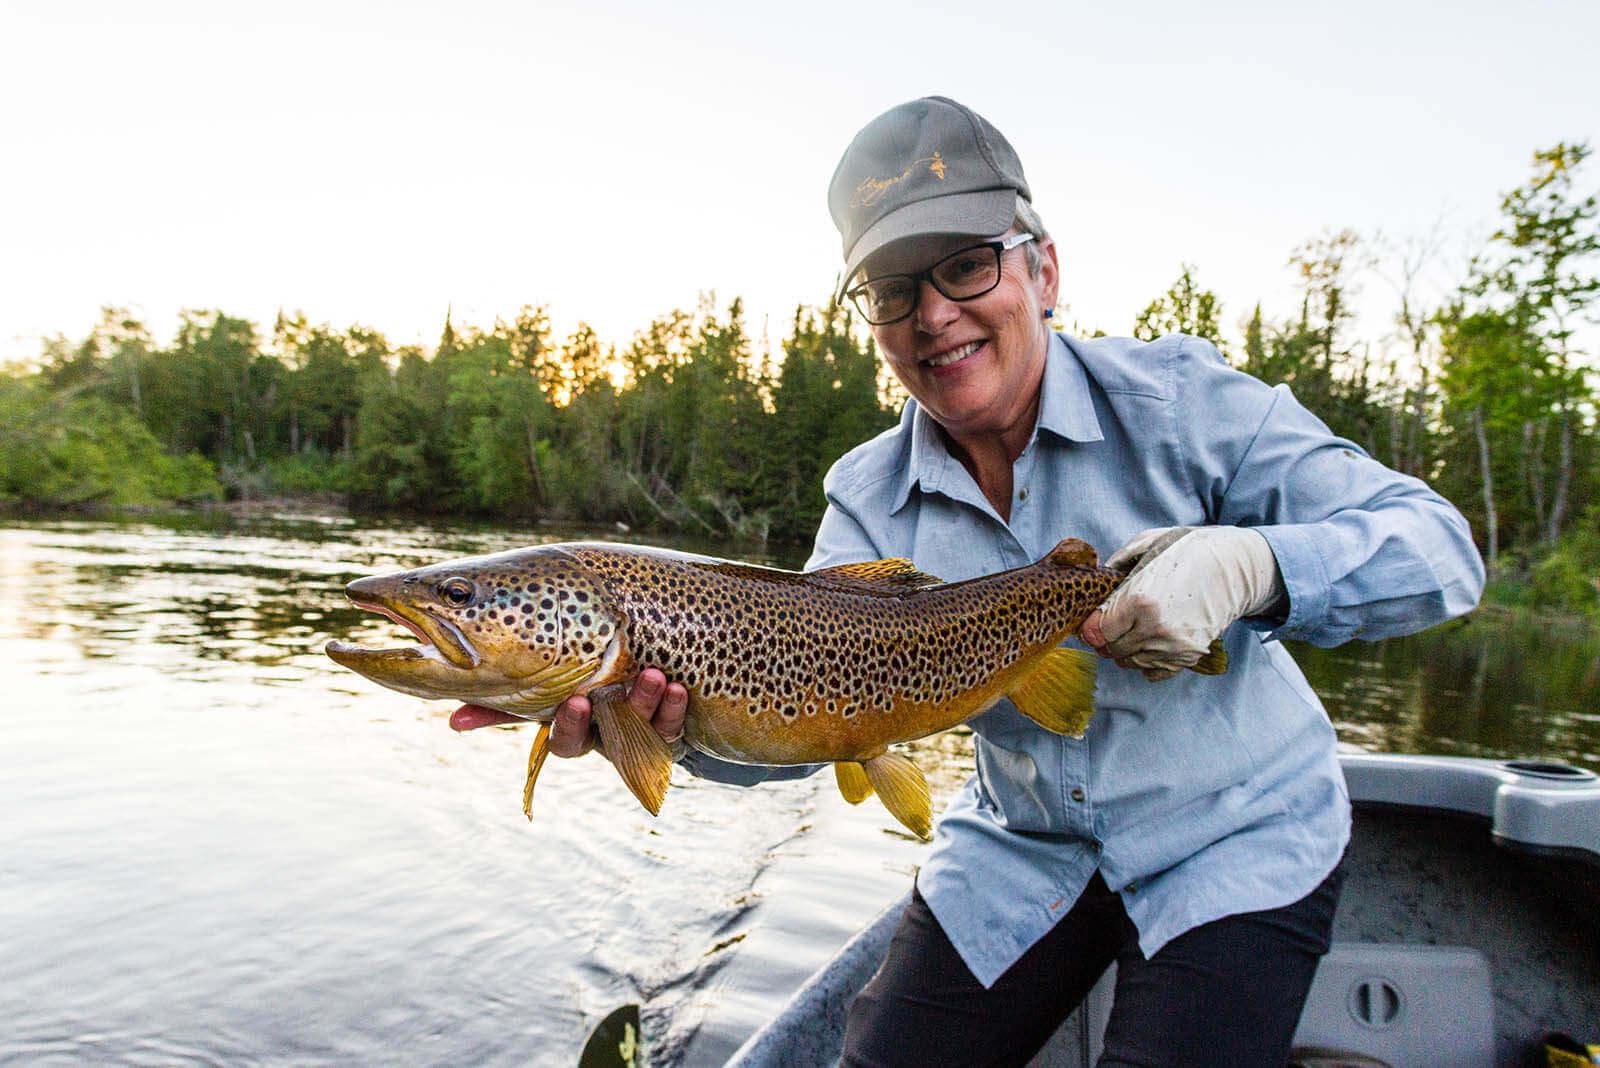 Fly Fishing – A Conversation with Angler Ann Miller